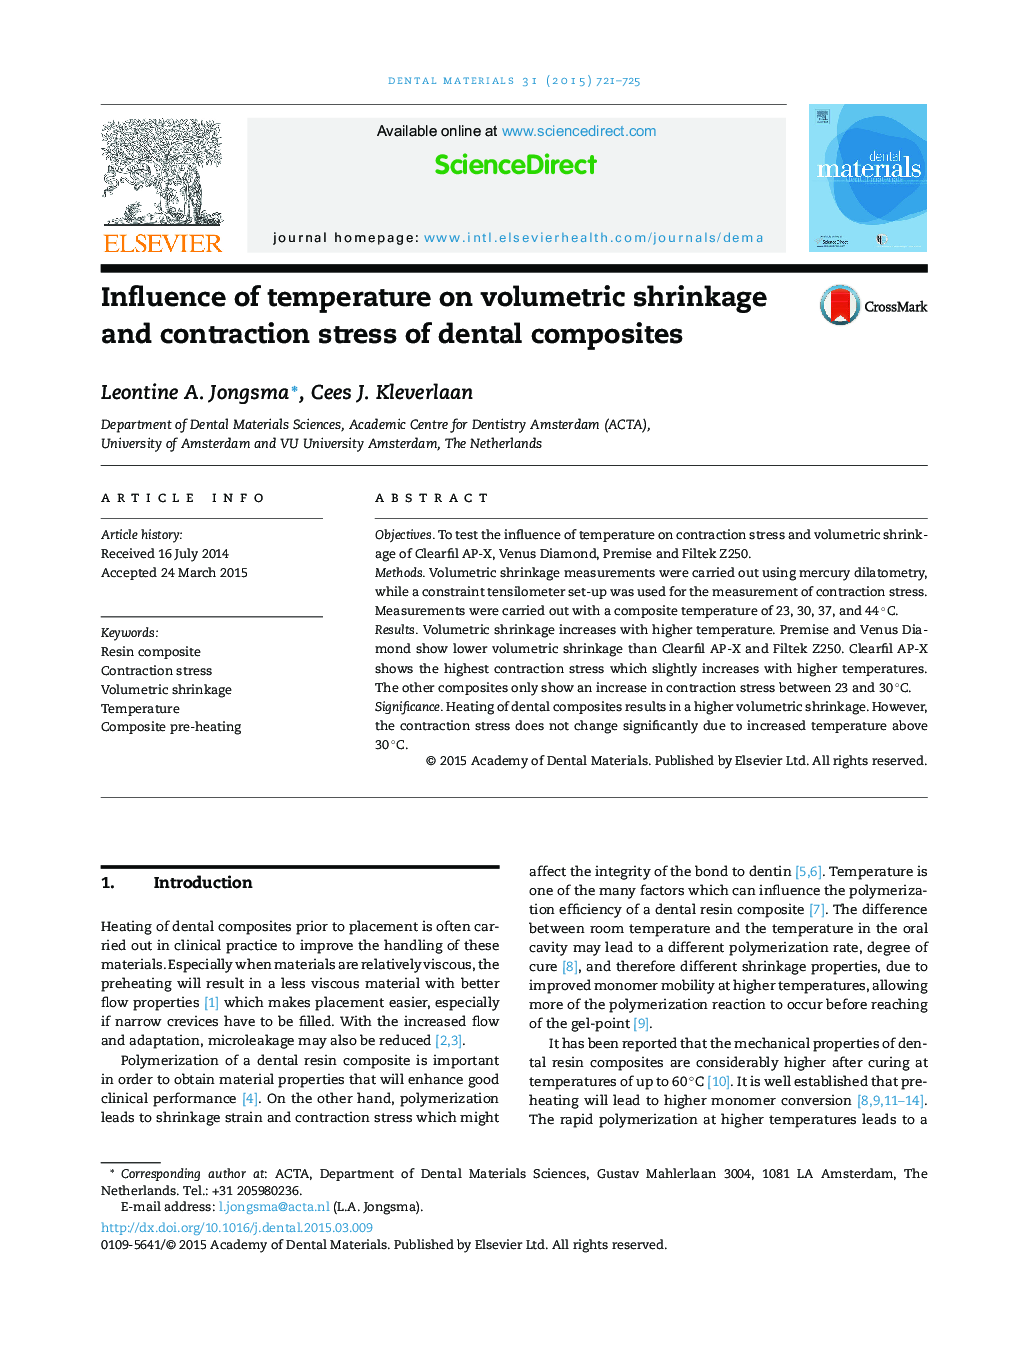 Influence of temperature on volumetric shrinkage and contraction stress of dental composites